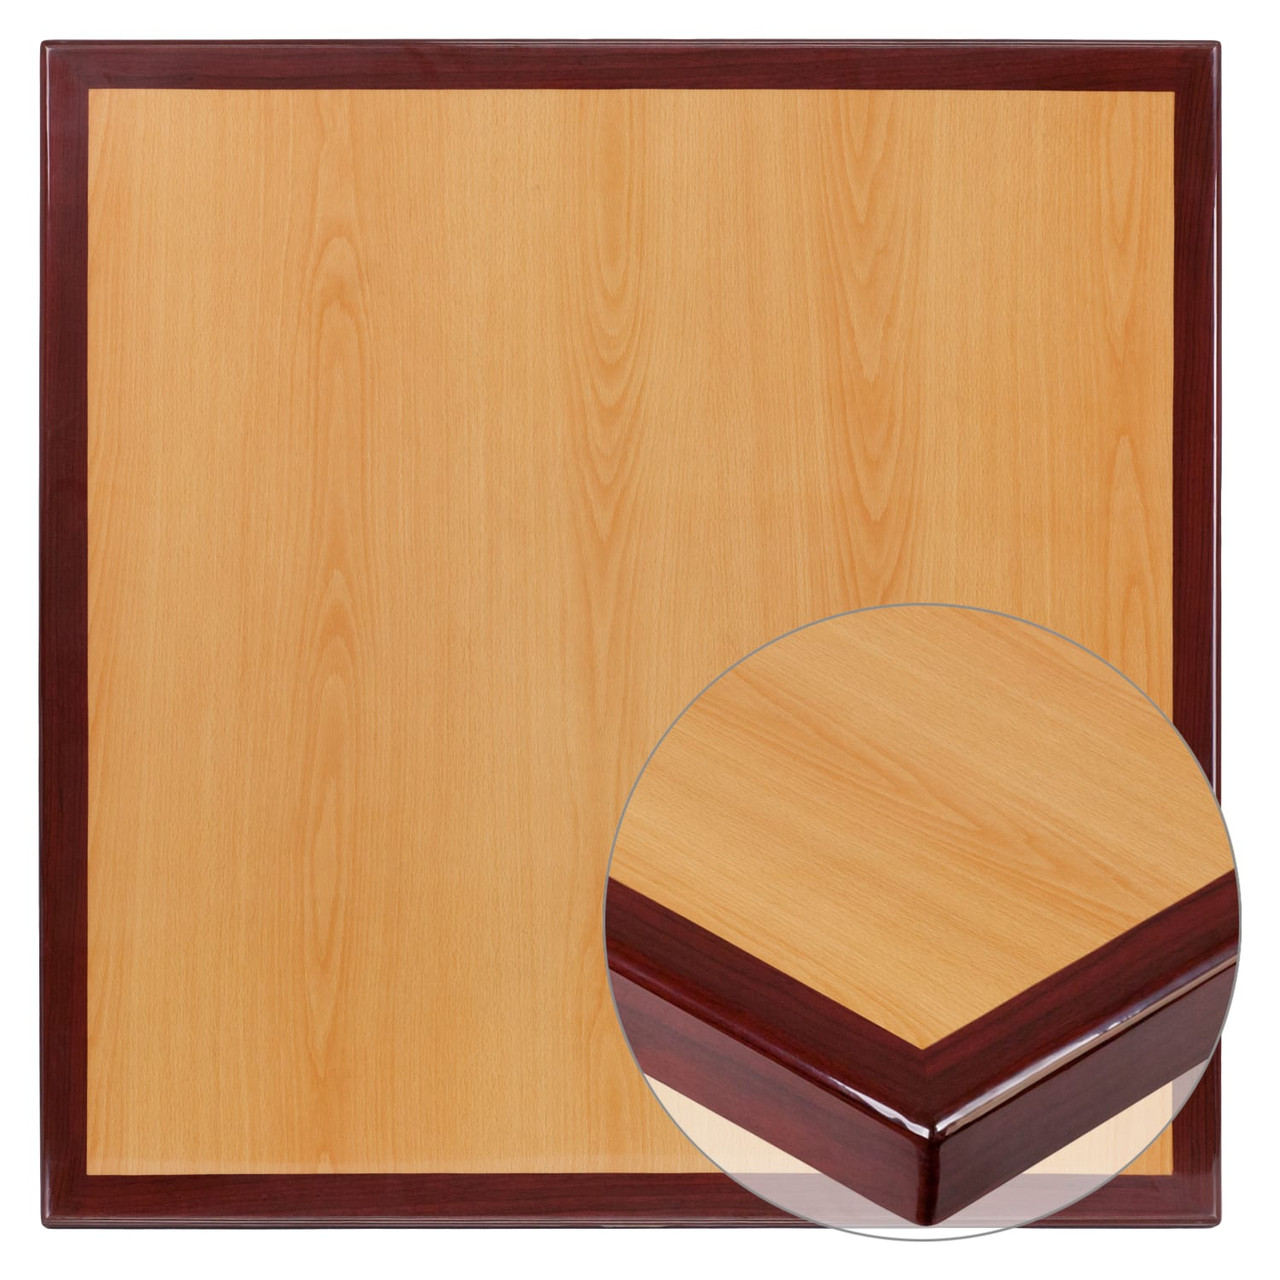 30” Square 2-Tone High-Gloss Cherry / Mahogany Resin Table Top with 2” Thick Drop-Lip